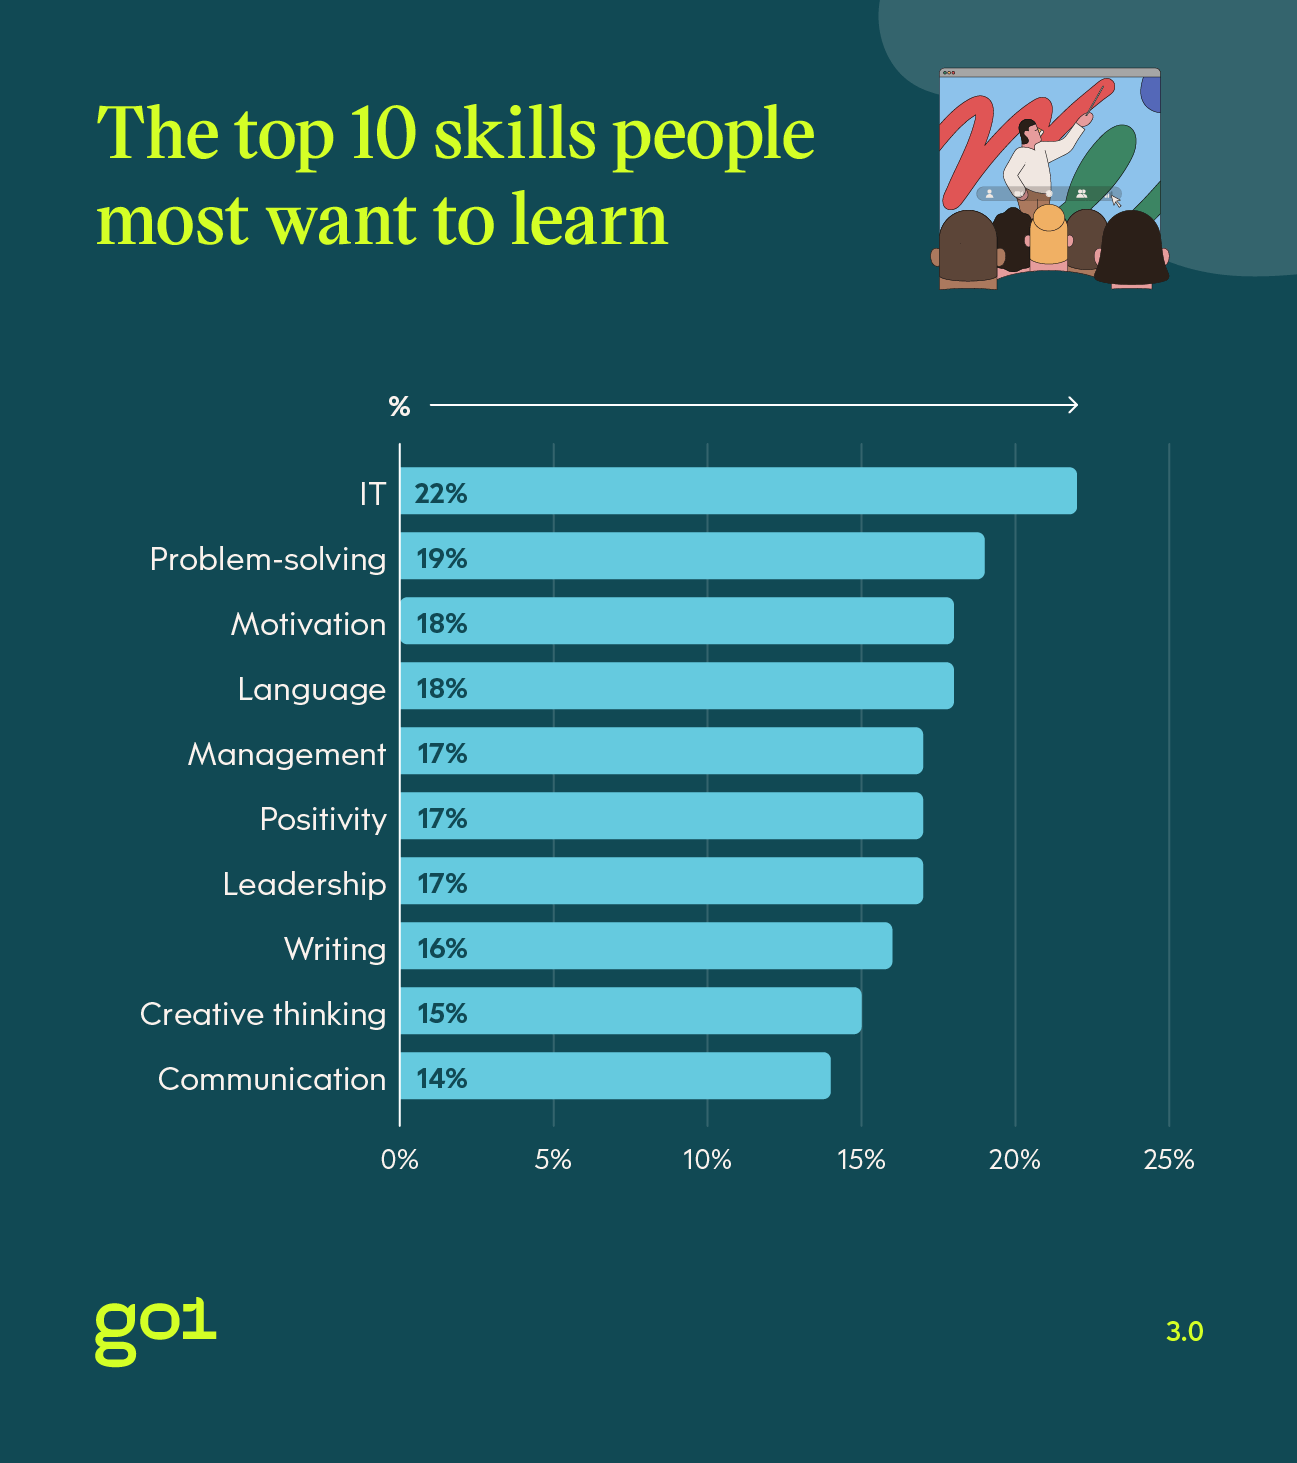 Bar chart showing the top 10 skills people most want to learn. 22% of people want to improve their IT skills